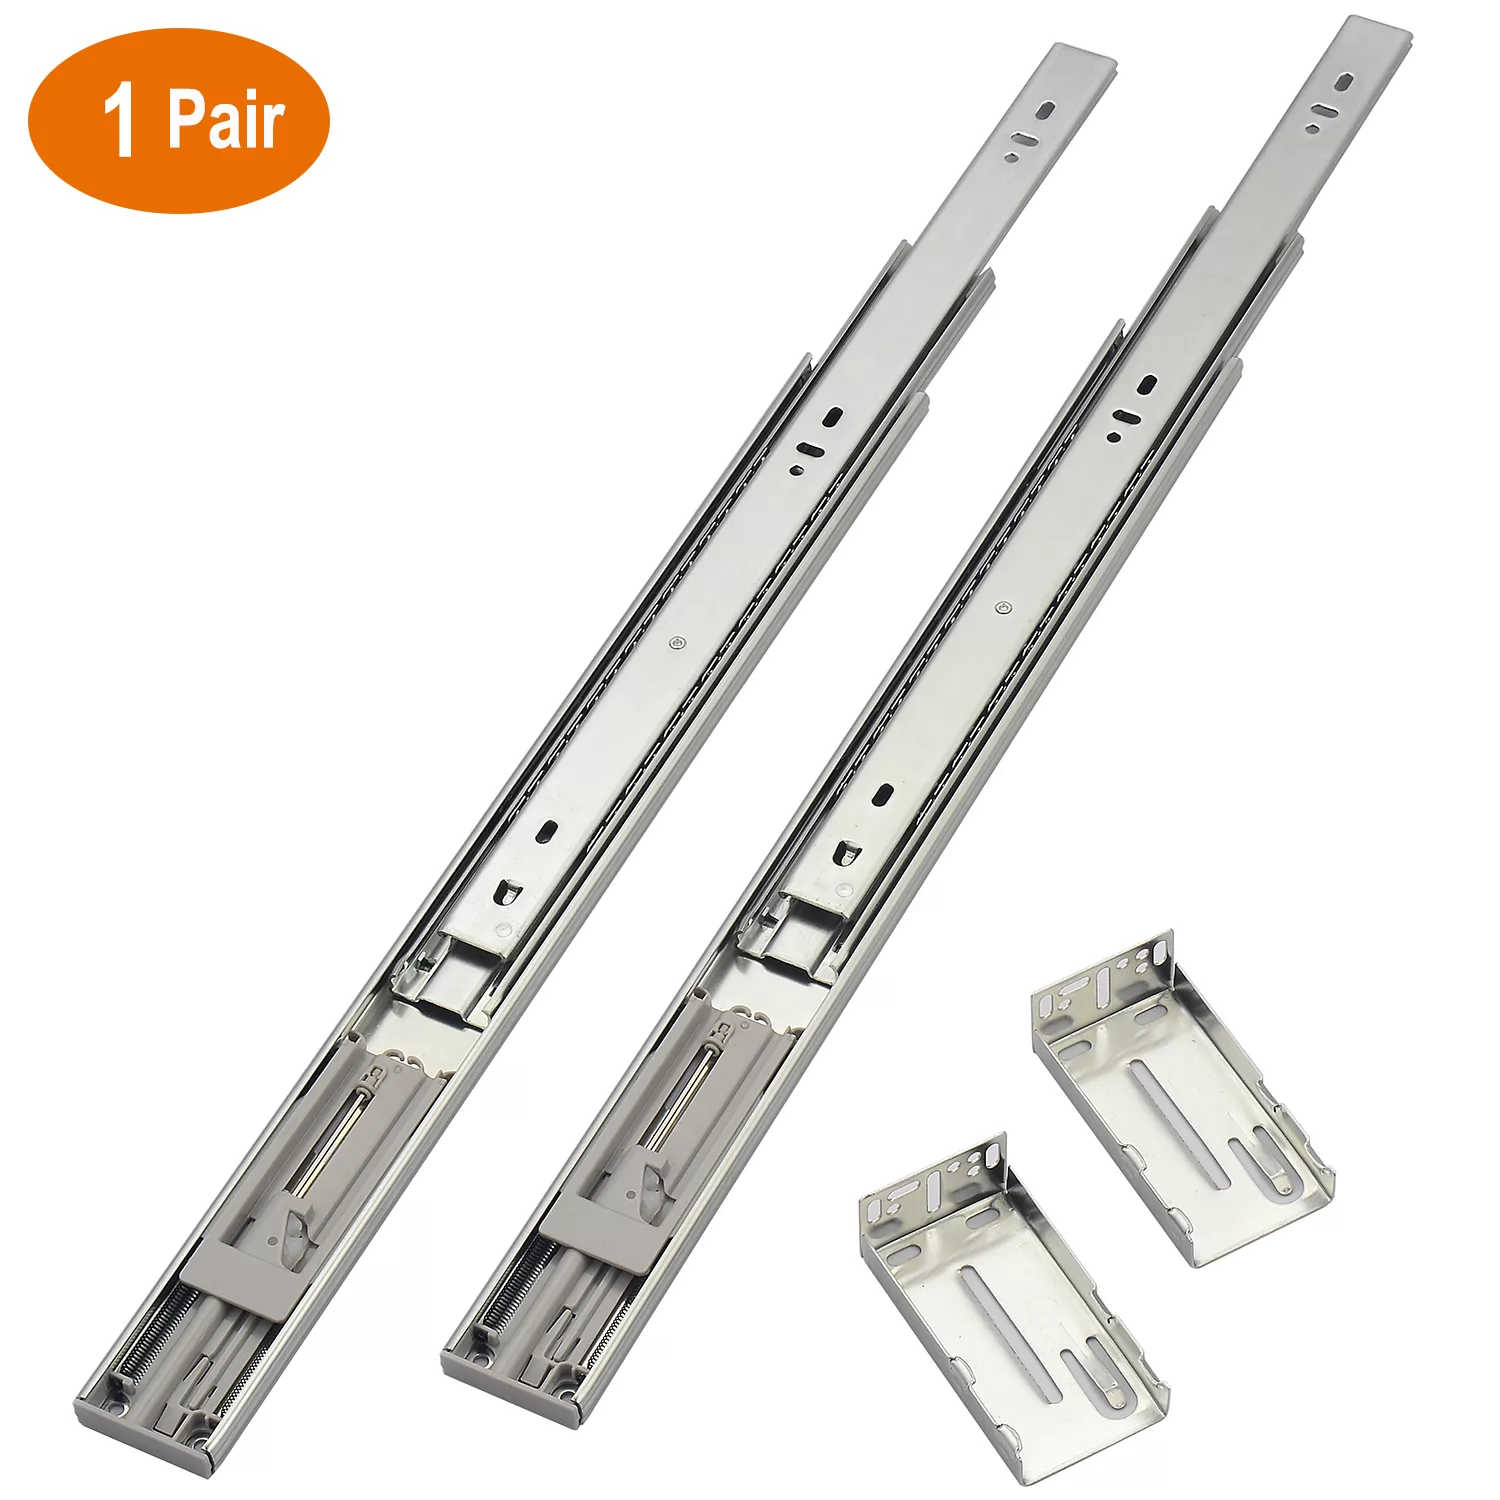 OCG Soft Close Drawer Slides,  Full Extension Ball Bearing Low Noise Drawer Slides for Cabinets with Face Frame, 1 Pair